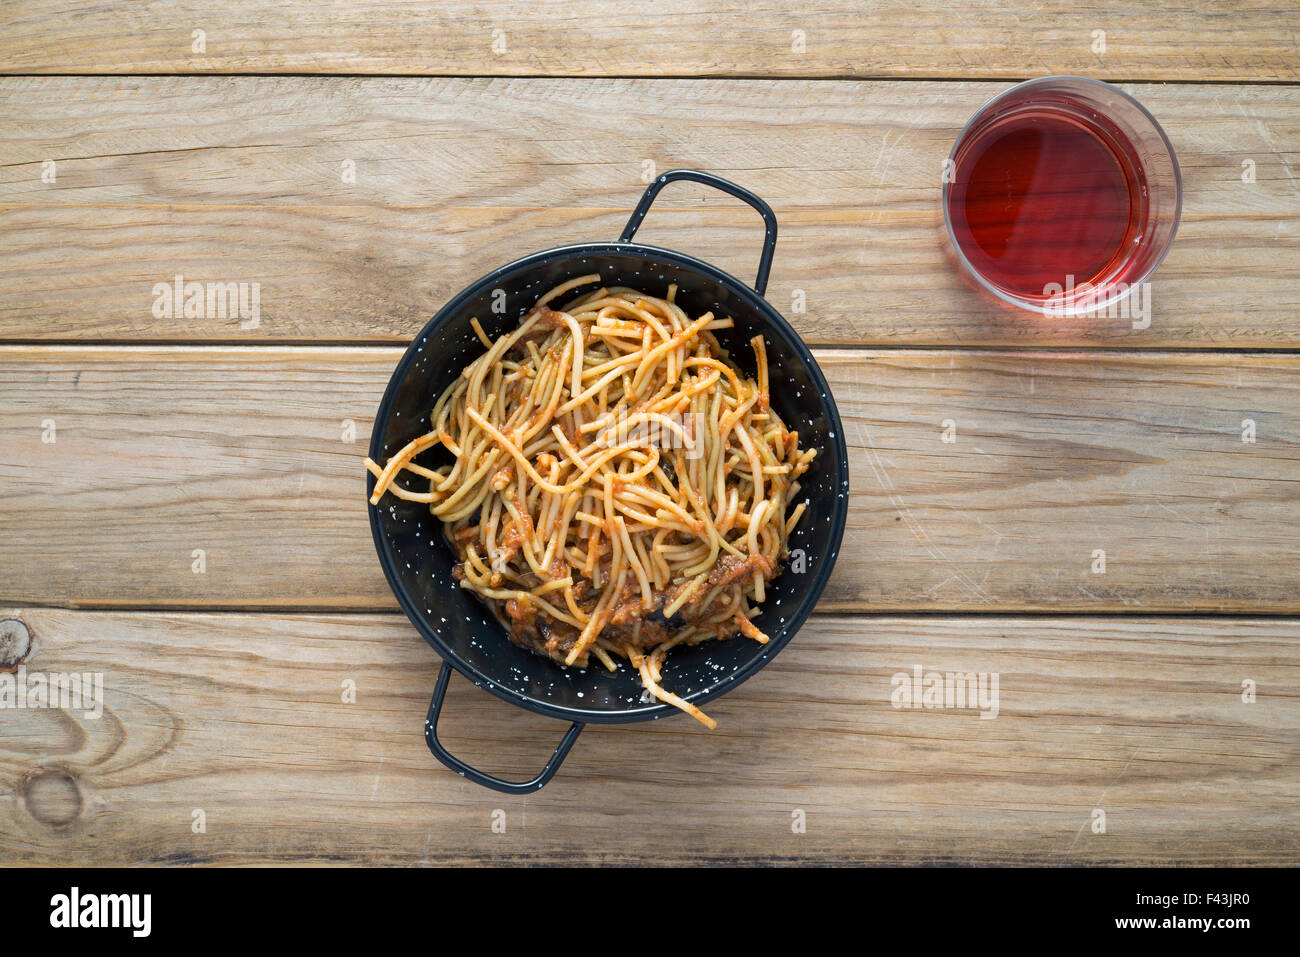 Spaghetti with tomato sauce on wooden table. Not forgetting the glass of claret Stock Photo